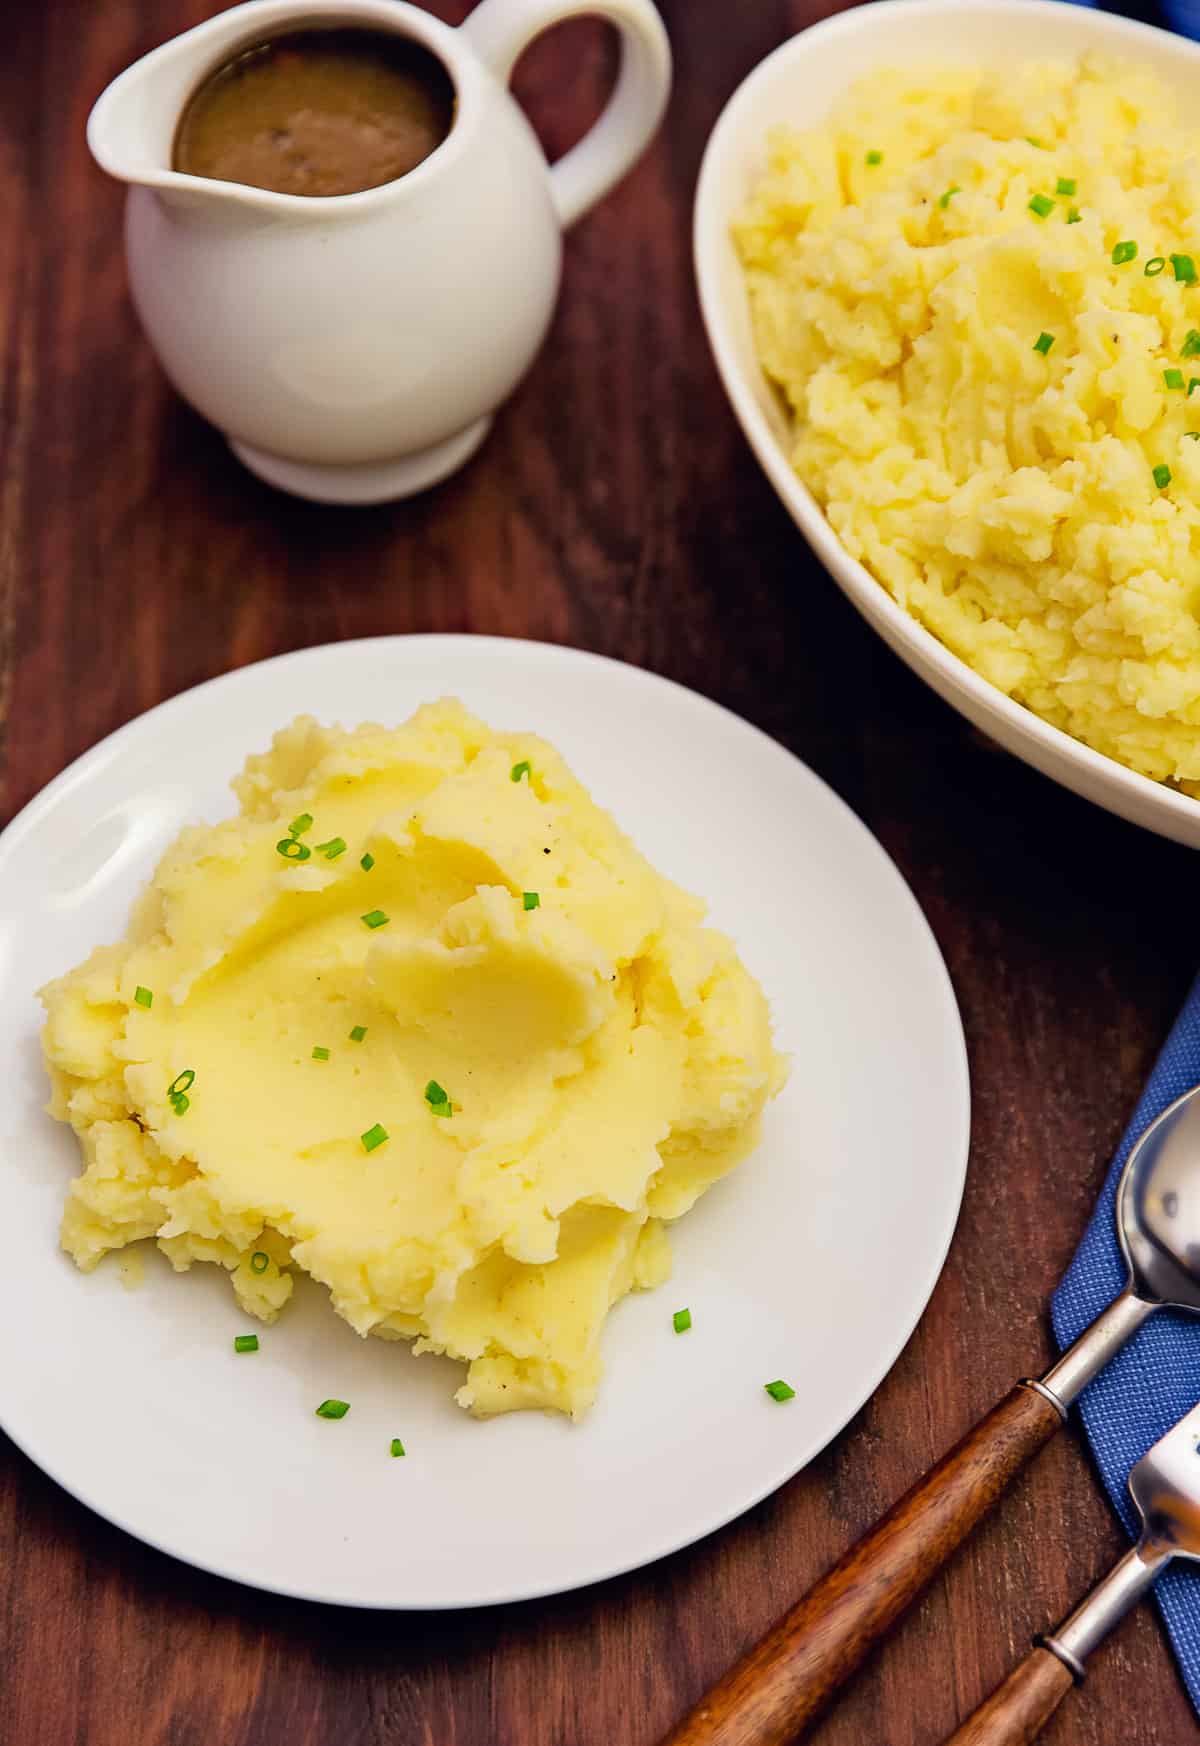 mashed potatoes, potatoes, super simple mashed potatoes, dinner, lunch, side, gluten free, vegan, vegetarian, whole food plant based, wfpb, recipe, oil free, refined sugar free, easy recipe, vegan recipe, gluten free recipe, vegetarian recipe, almond milk, vegan mashed potatoes, vegetarian mashed potatoes, whole food plant based mashed potatoes, wfpb mashed potatoes, vegan potatoes, vegetarian potatoes, whole food plant based potatoes, wfpb potatoes, quick side, side dish, gluten free side dish,